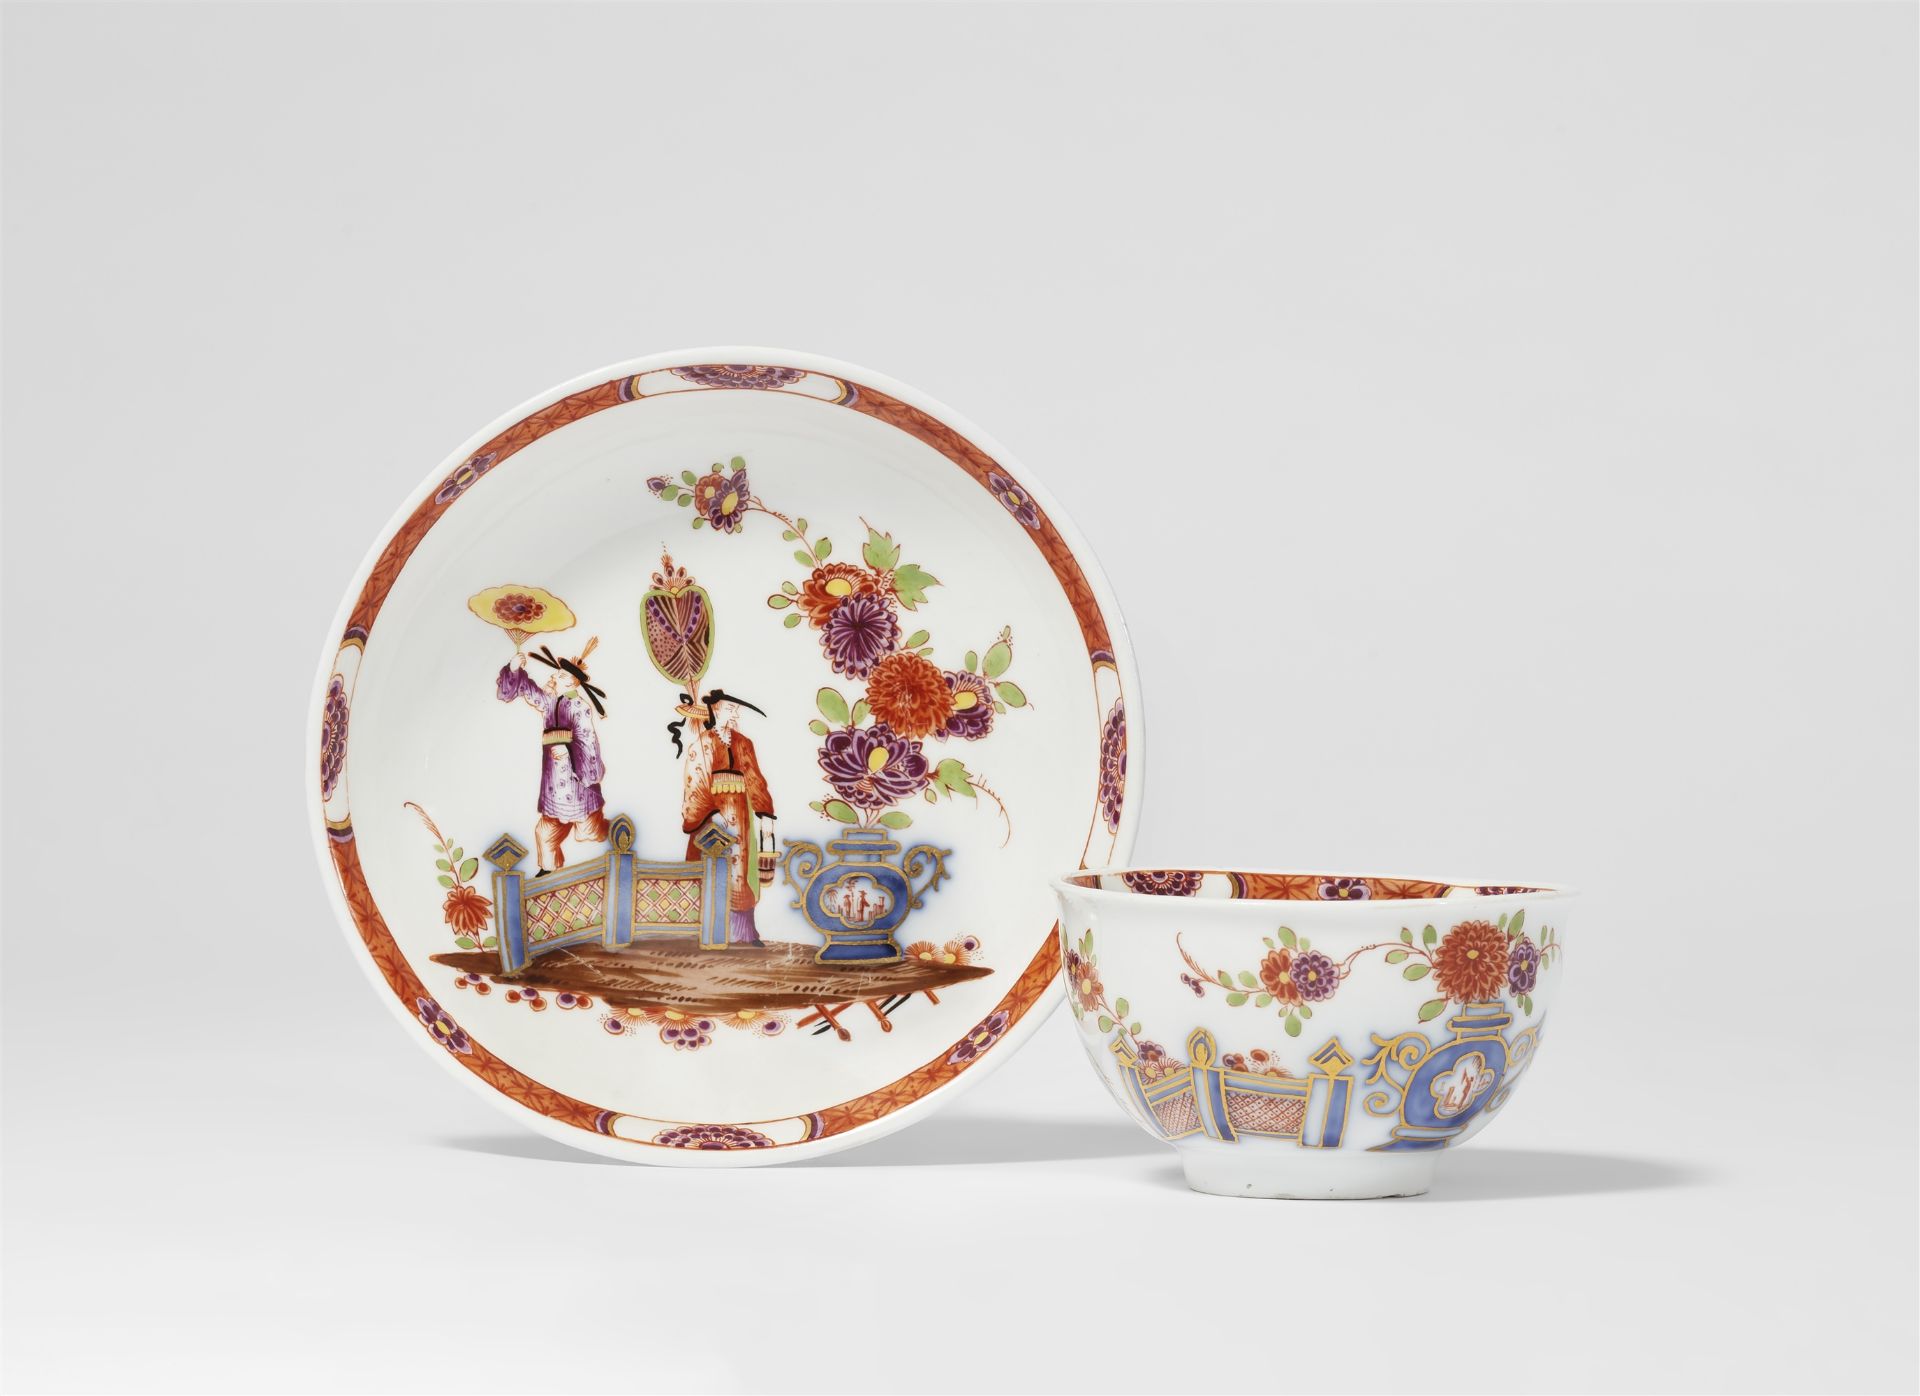 A Meissen porcelain tea bowl and saucer with Chinoiserie figures